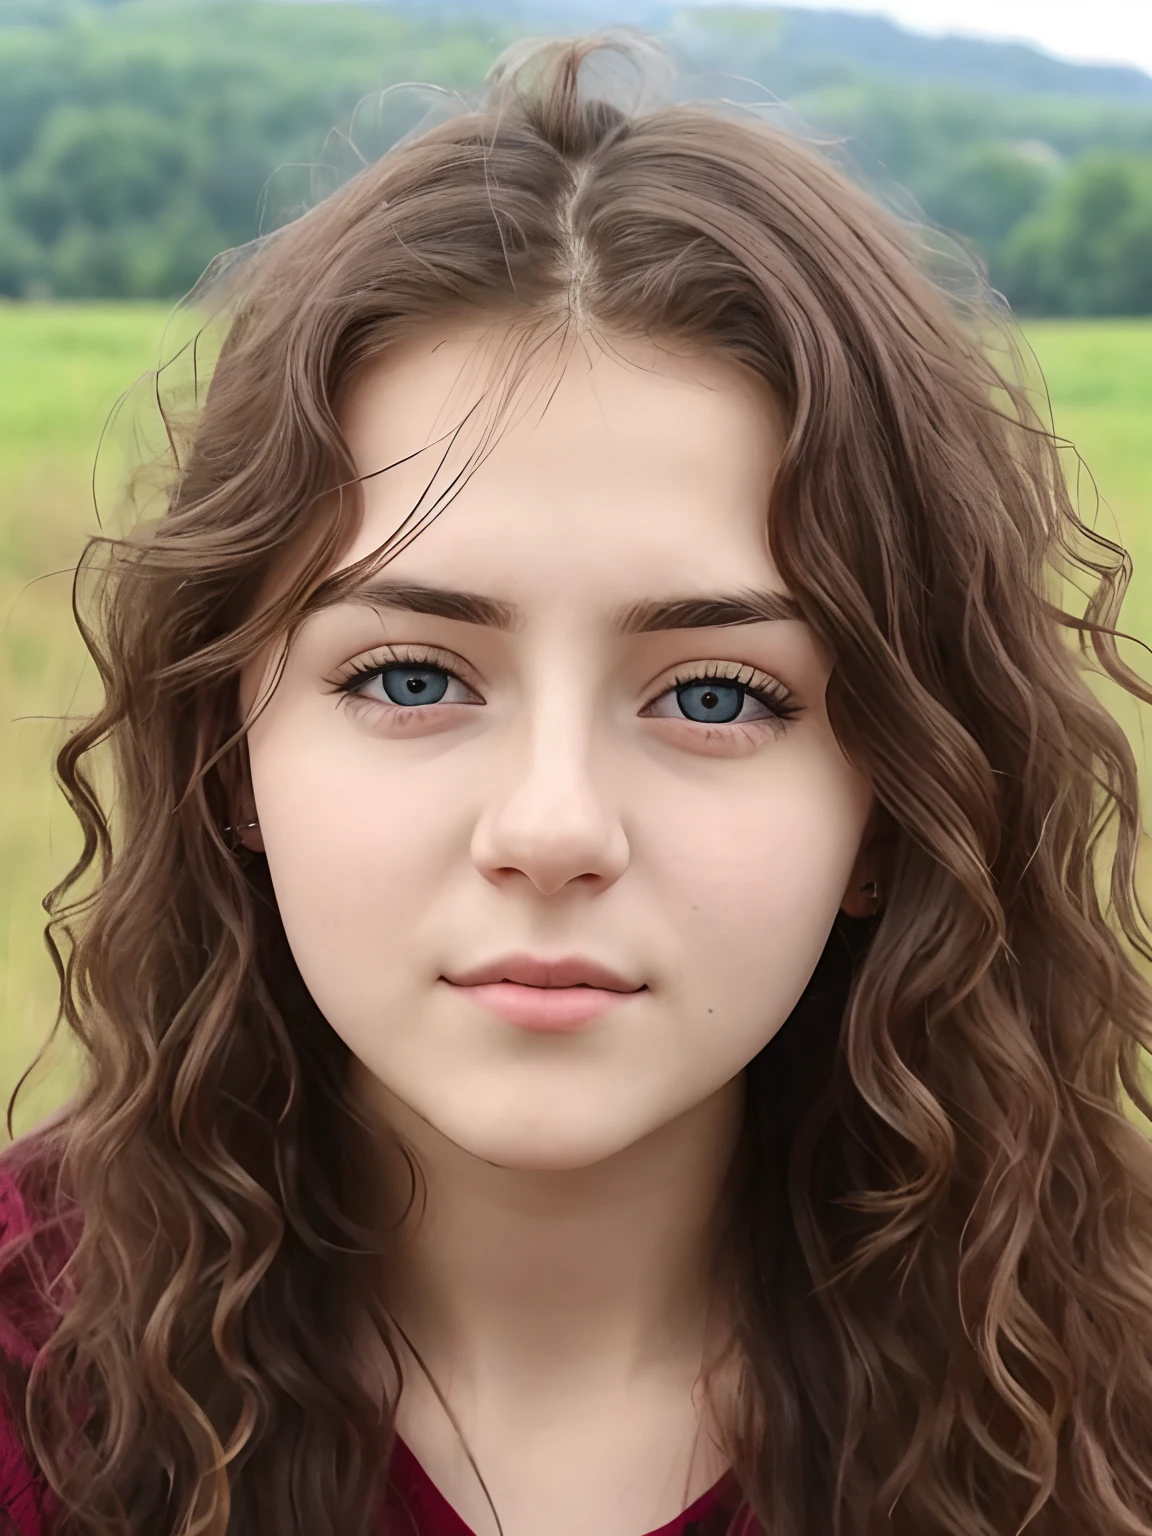 A 21 years old girl Face , in straight noise, big eye , thin lips , long curly hair, blue eyes, big , every detail of face , country side background,